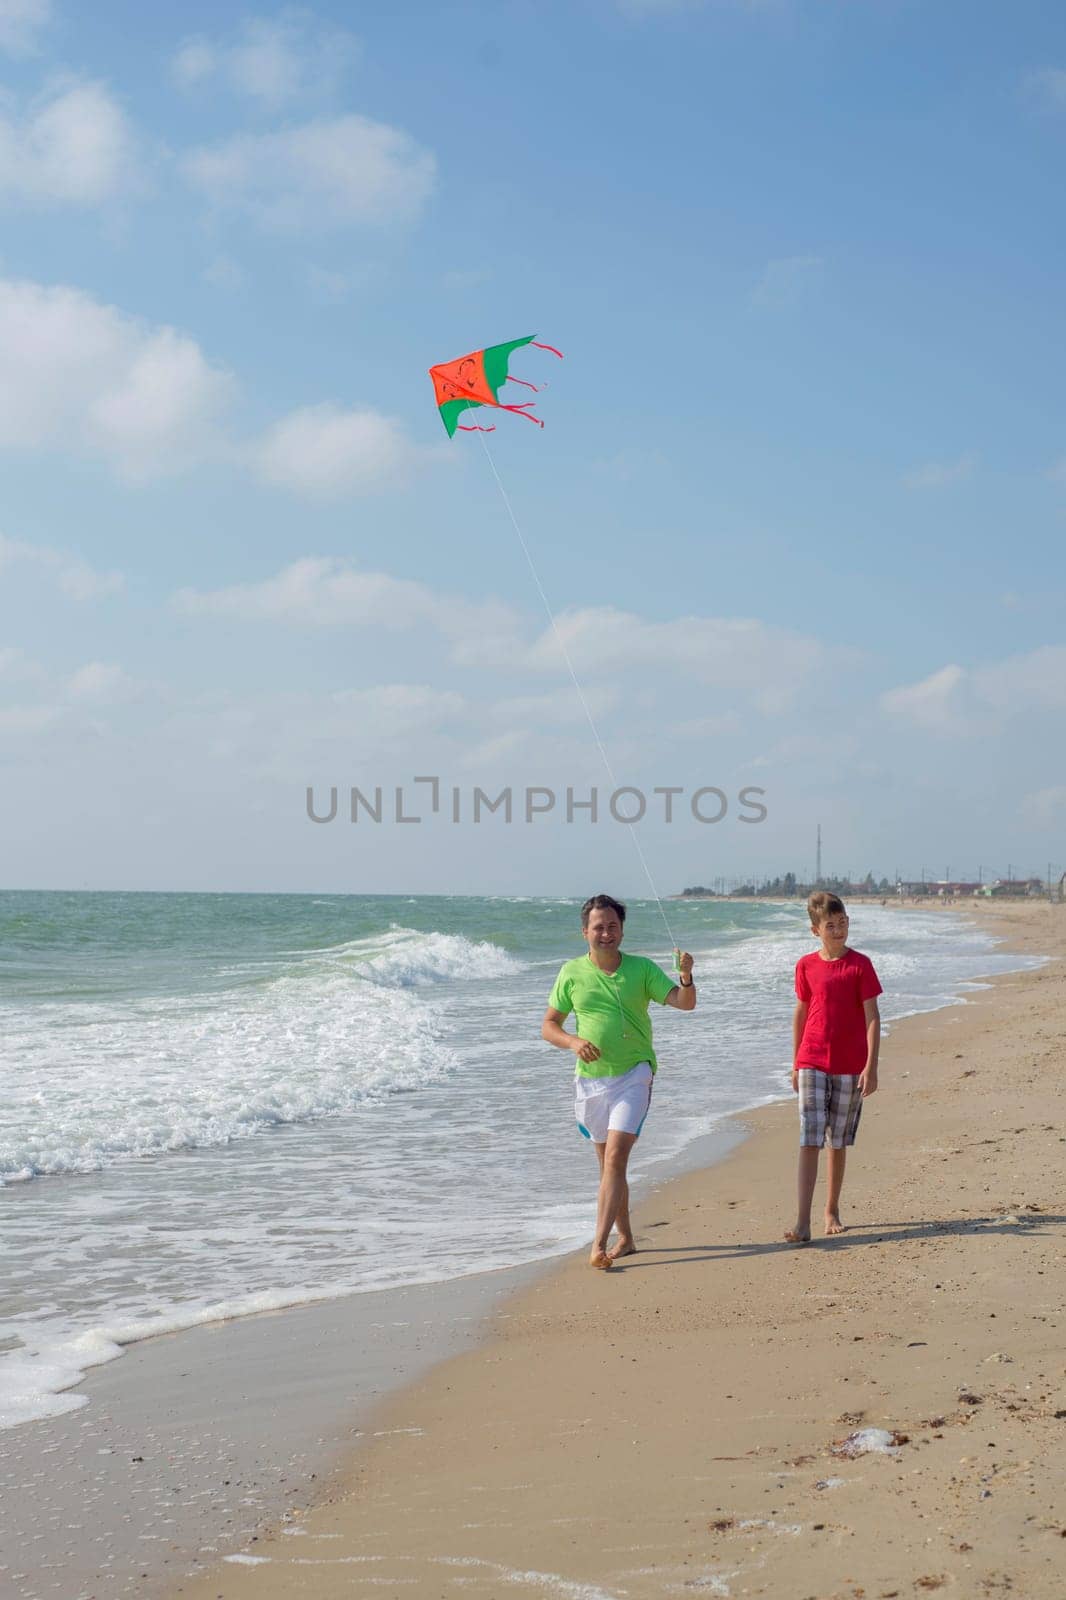 Rest of parents with children. Dad and son fly a kite near the sea